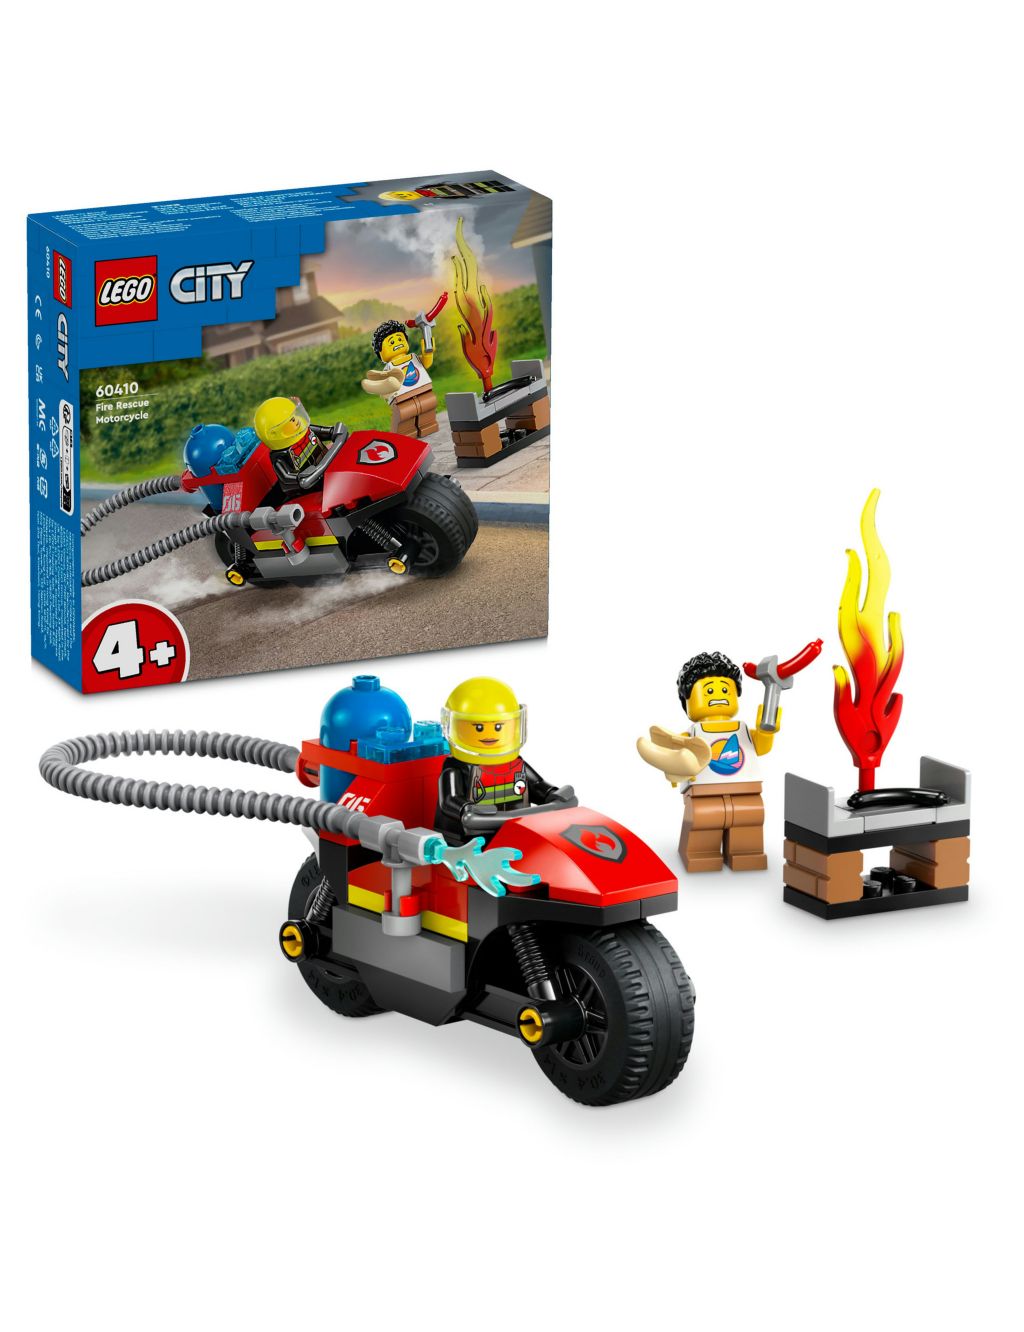 LEGO® City Fire Rescue Motorcycle Building Set 60410 (4+ Yrs)